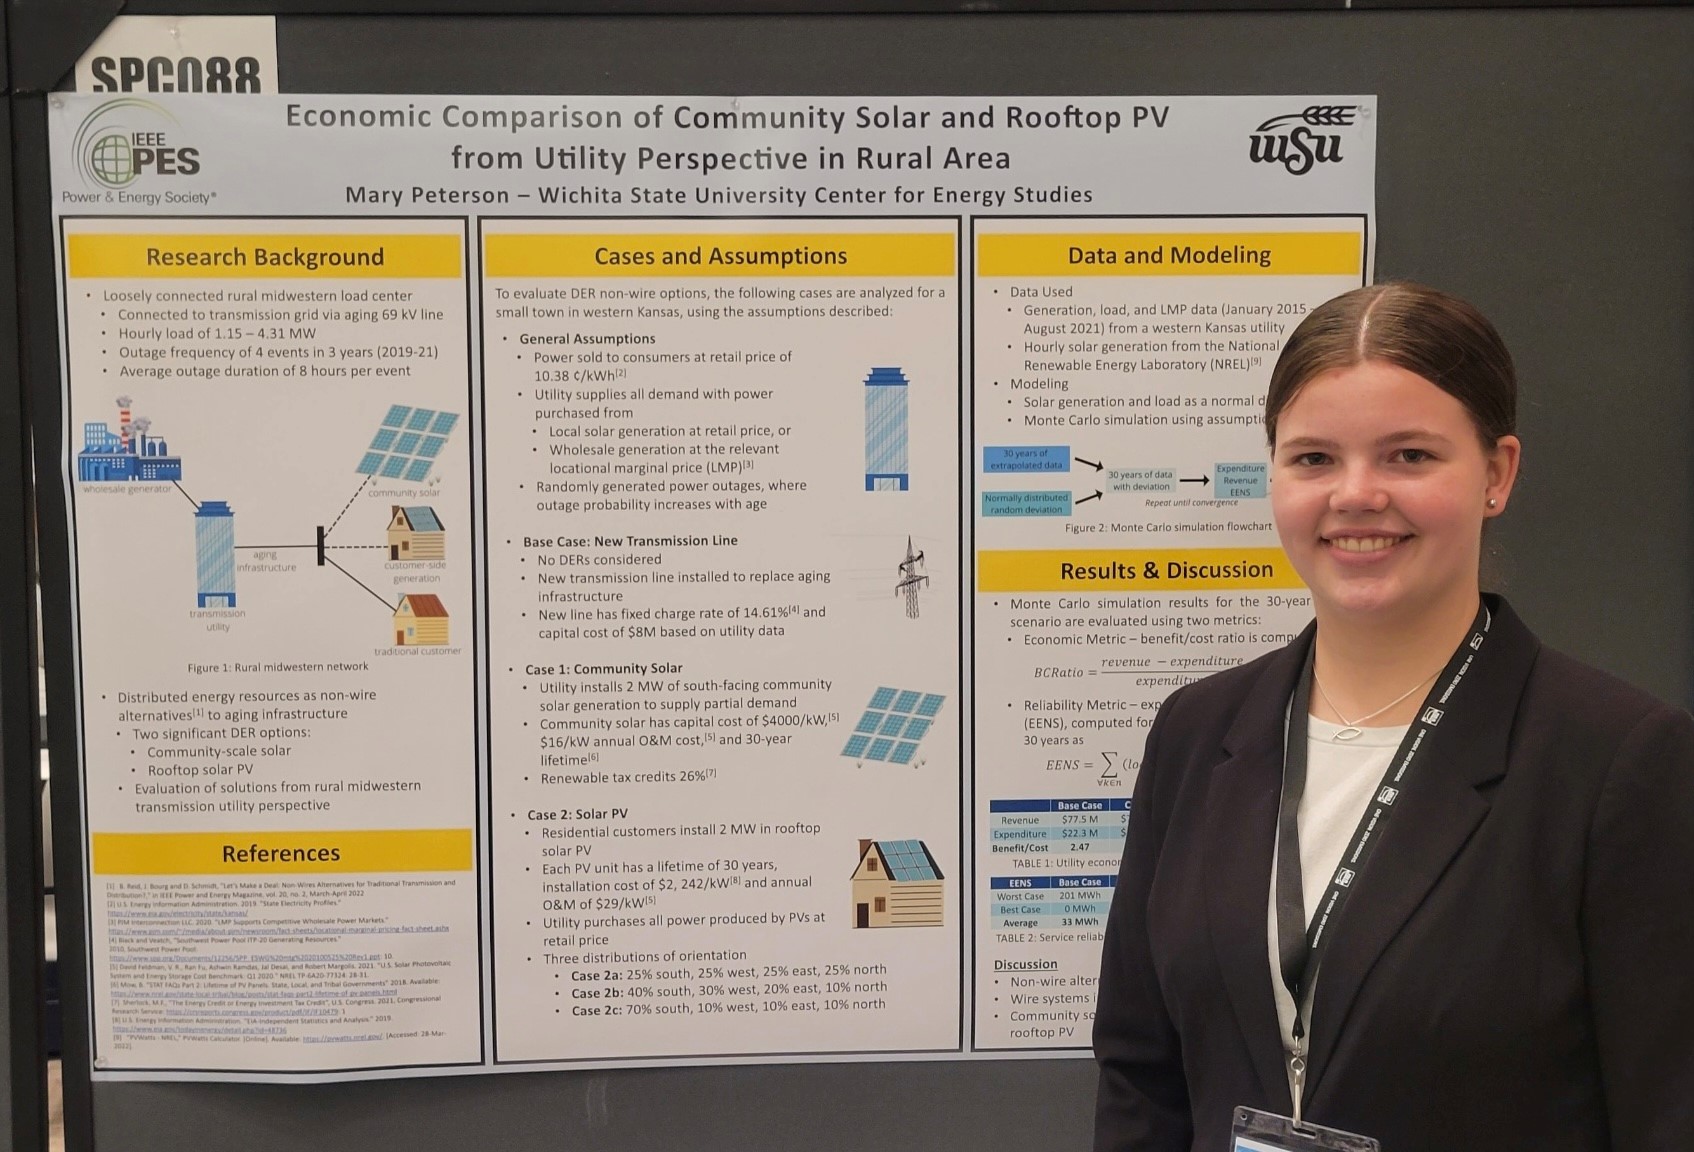 Honors student Mary Peterson posing for a photo with her research poster. She is wearing a black blazer with a white whirt and a conference lanyard around her neck. She is smiling and looking directly into the camera.